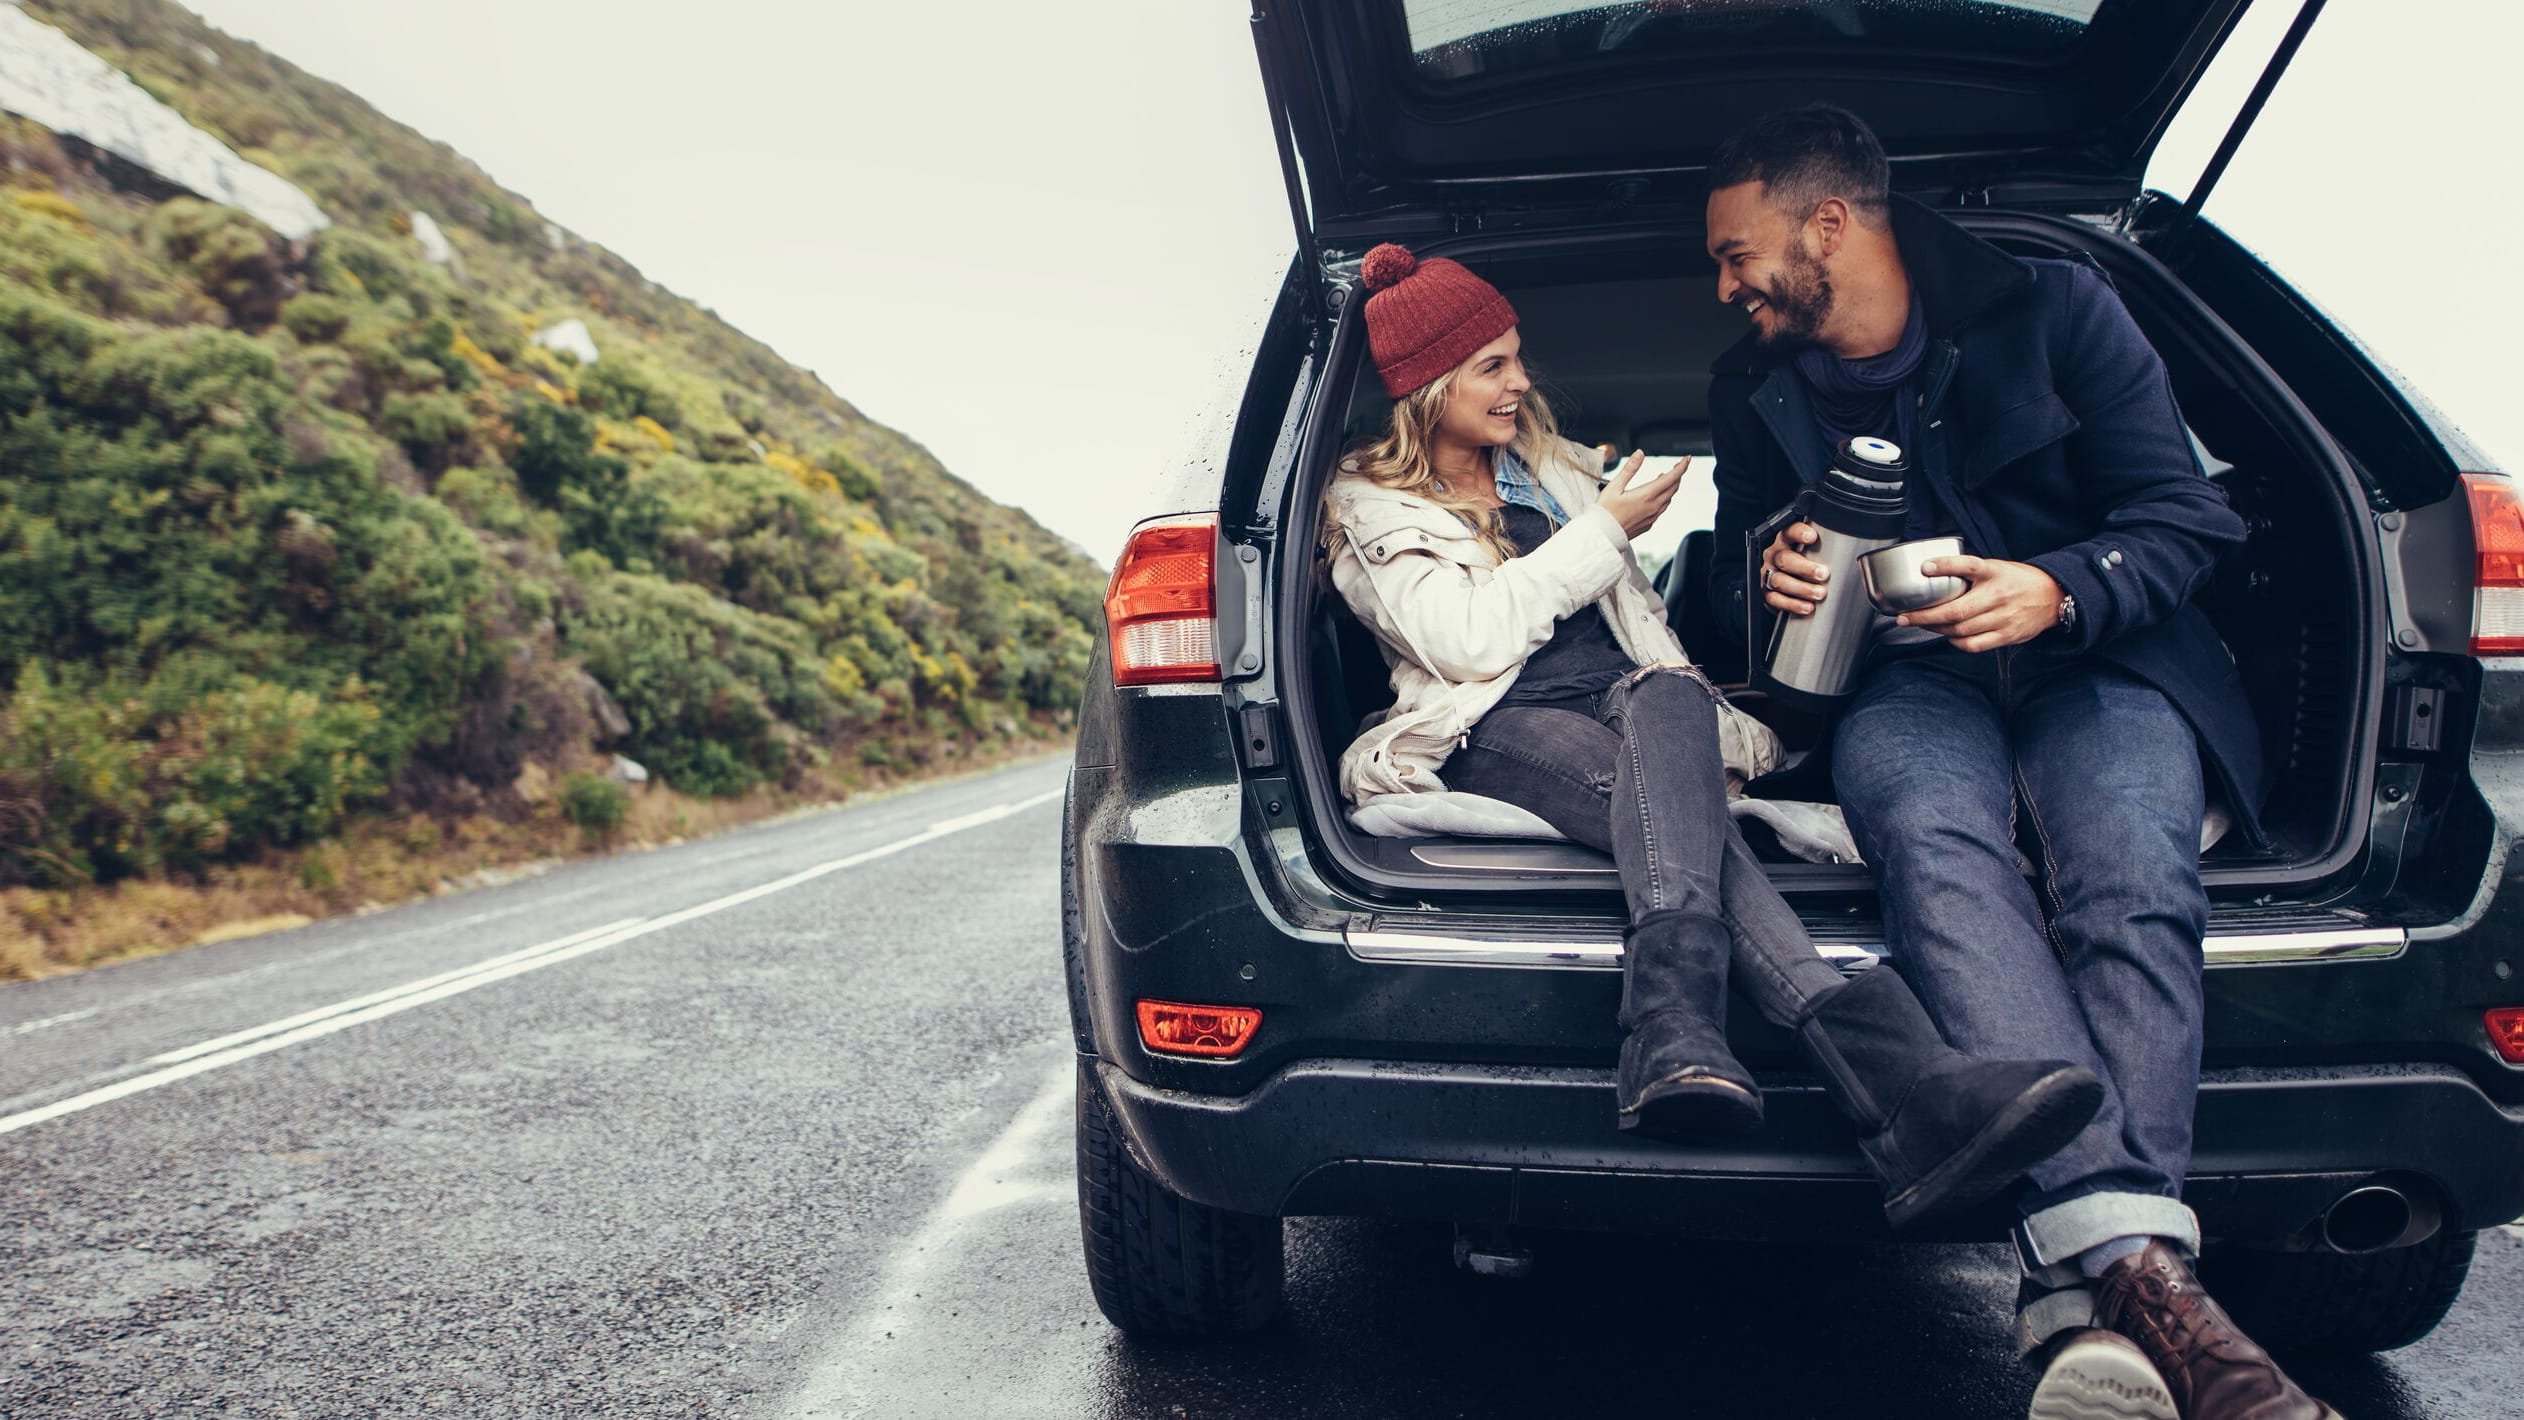 Couple on roadtrip in mountains